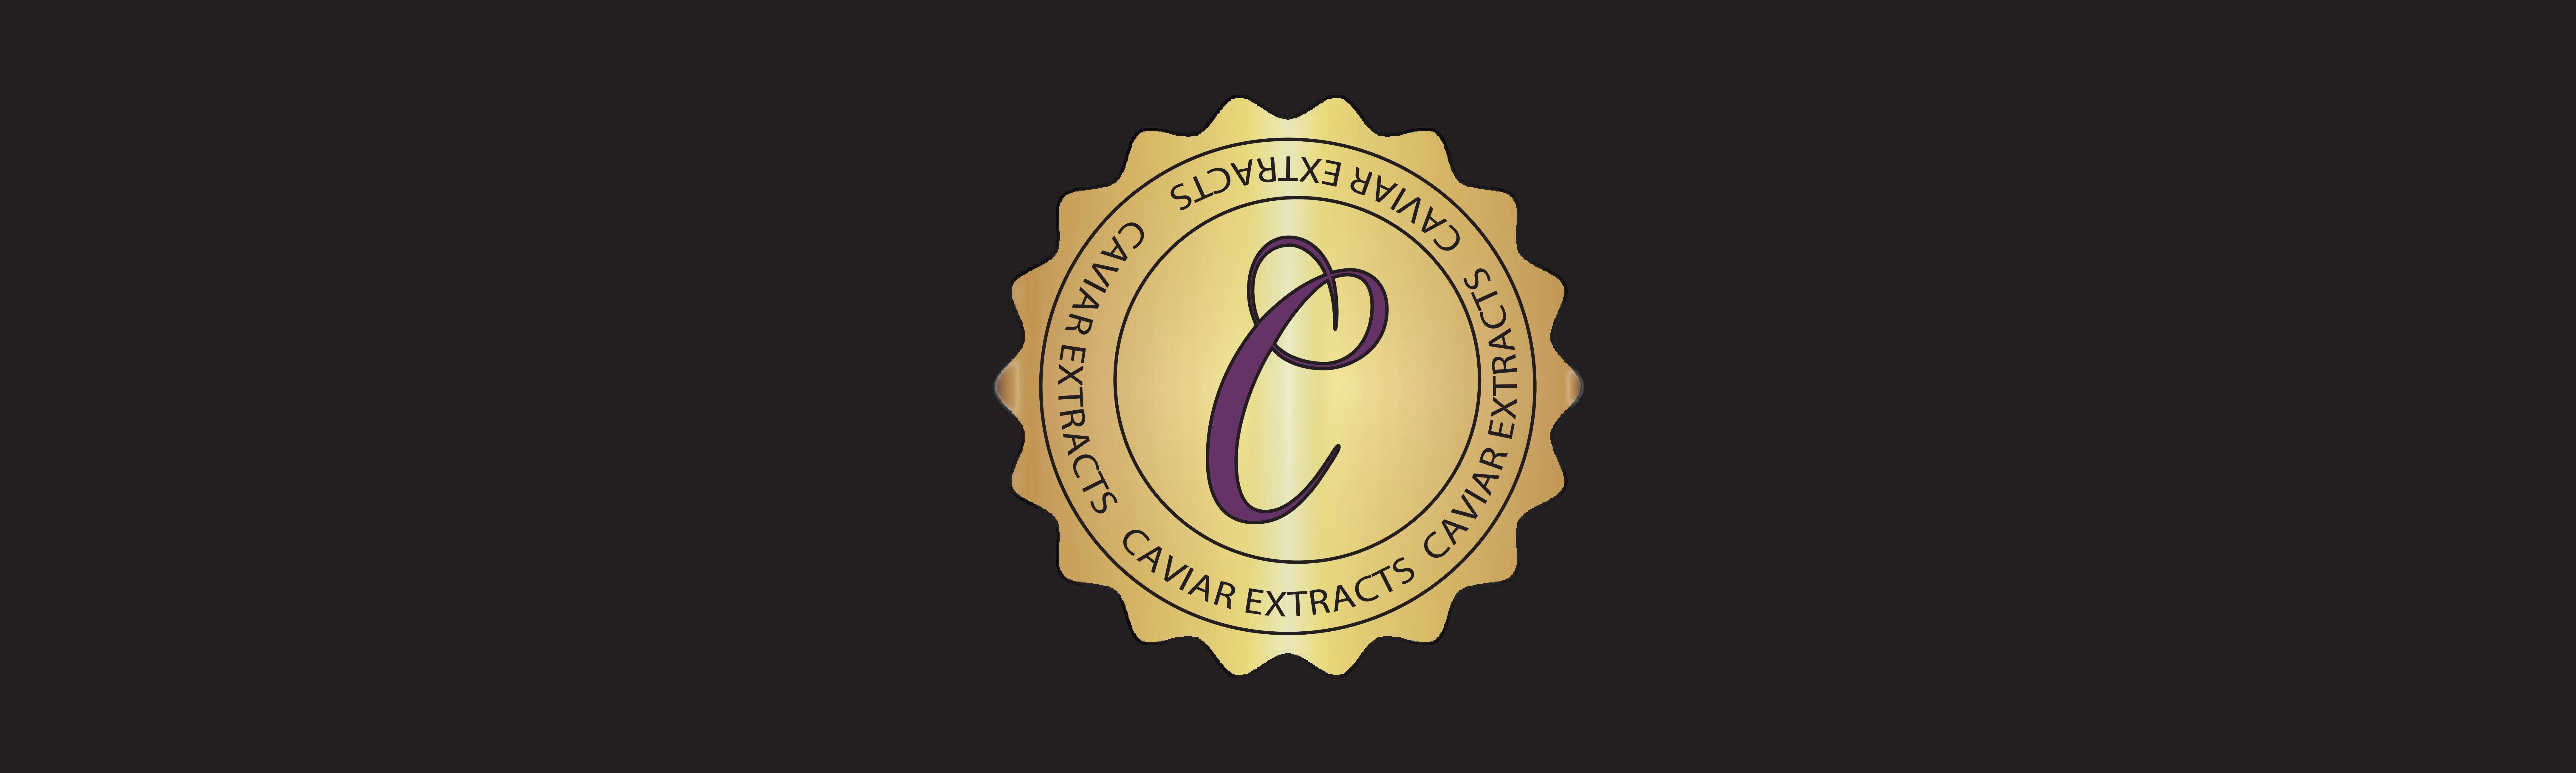 Caviar Extracts